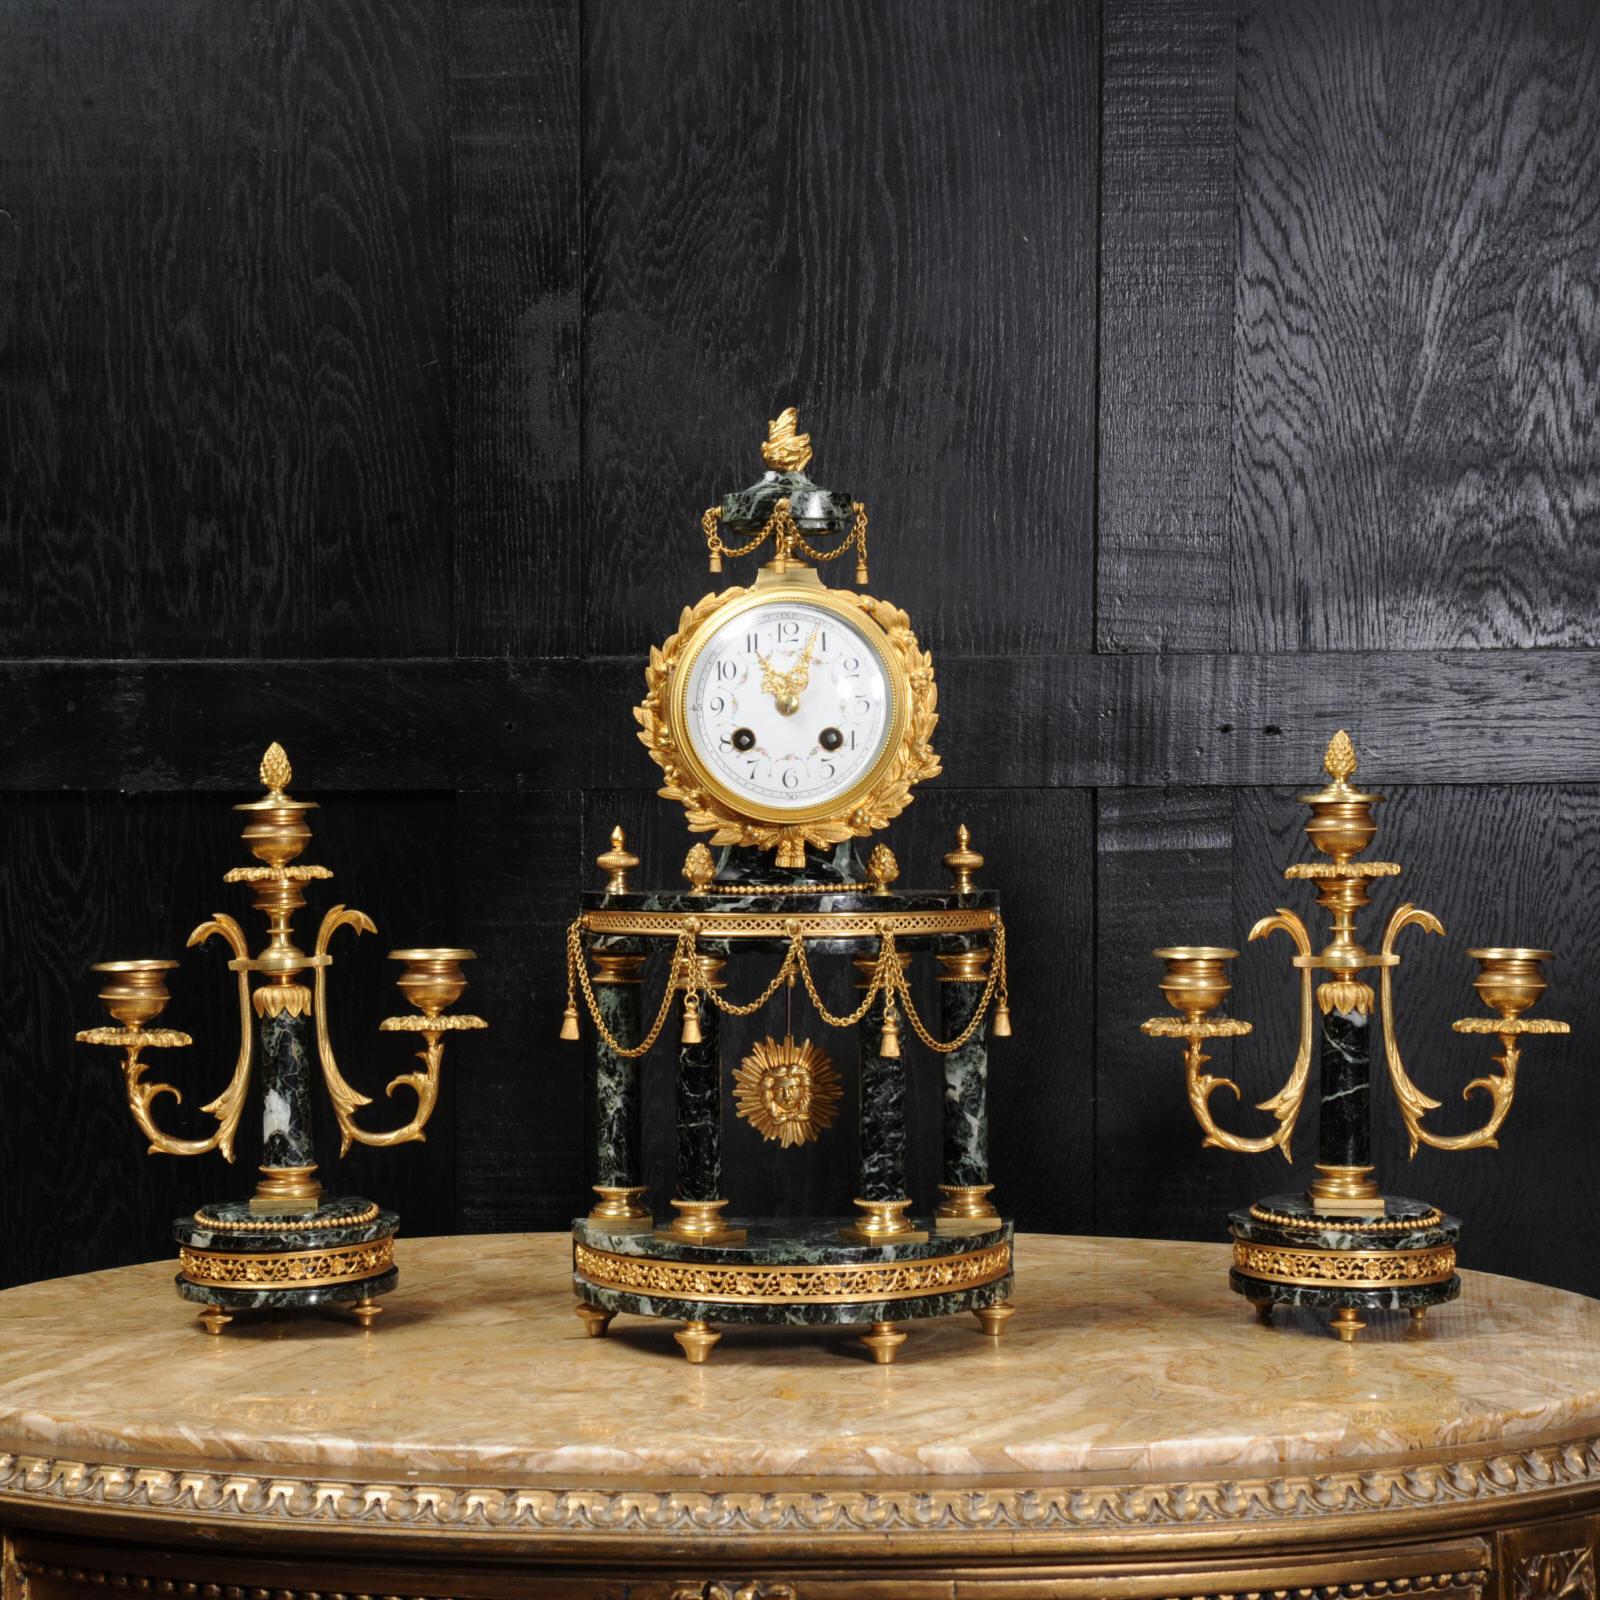 A superb original antique French clock set, circa 1900, beautifully modelled in a stunning variegated green marble with gilded bronze mounts. The clock is formed as a four pillar portico, the movement mounted in a drum with the ormolu pendulum